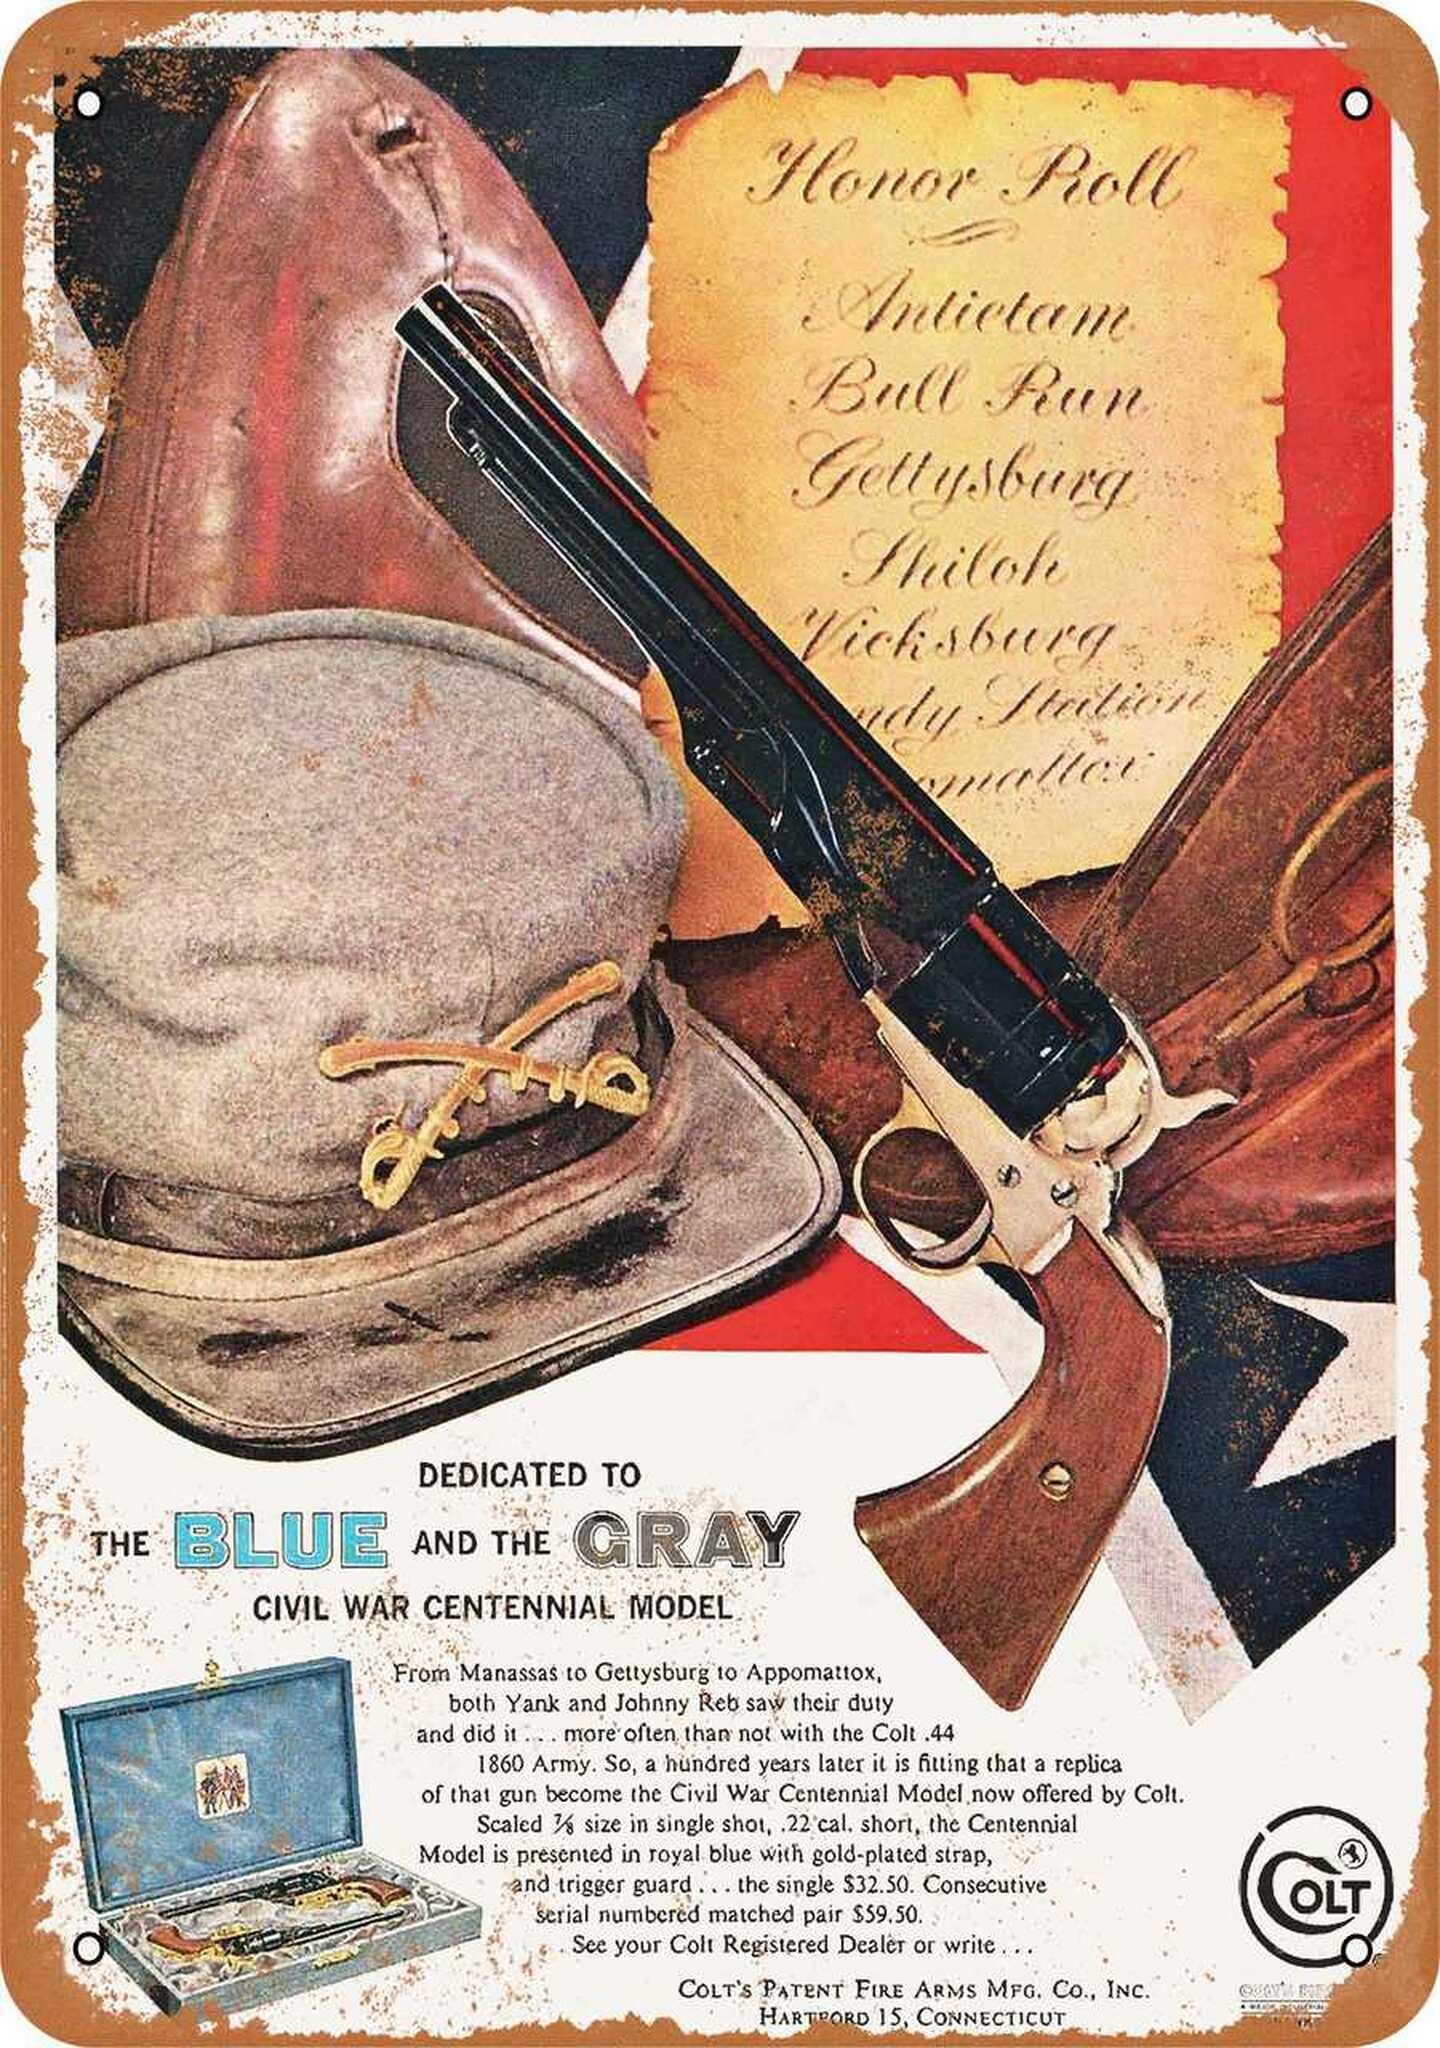 Advertisement for a blue and gray set of commemorative
Colt pistols, which come in a Civil War-decorated box